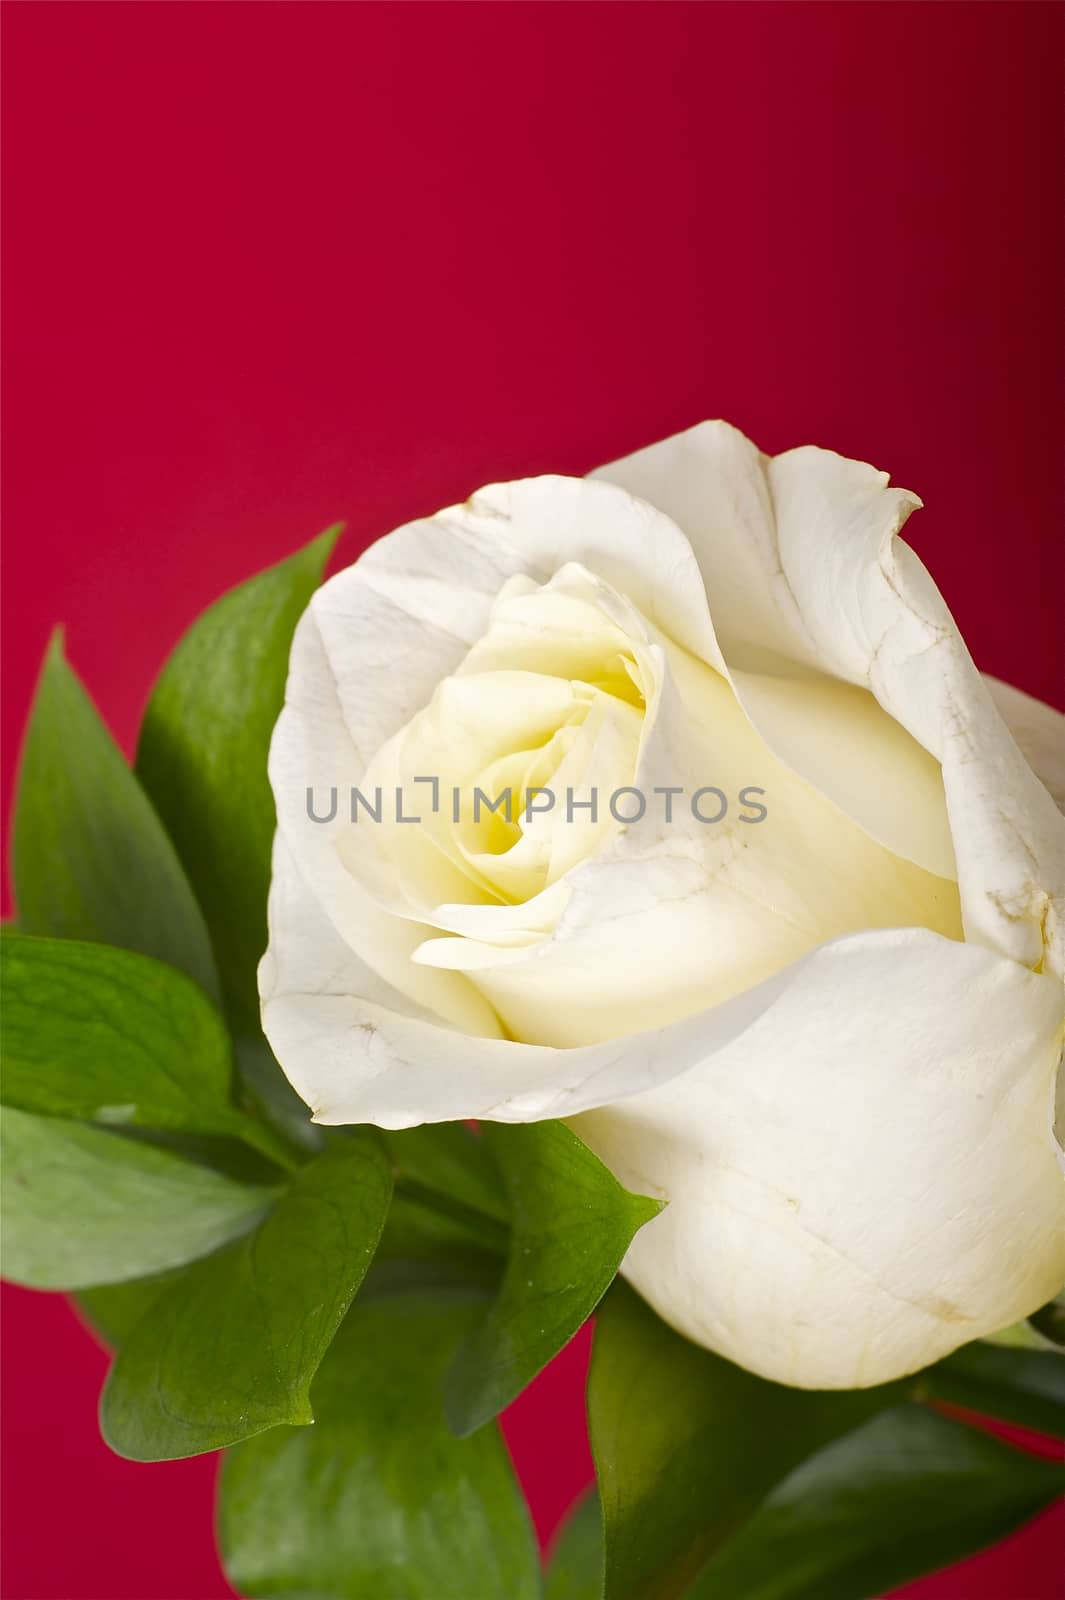 The Rose - Dark Burgundy Background. White Rose and Green Leafs. Floral Theme.